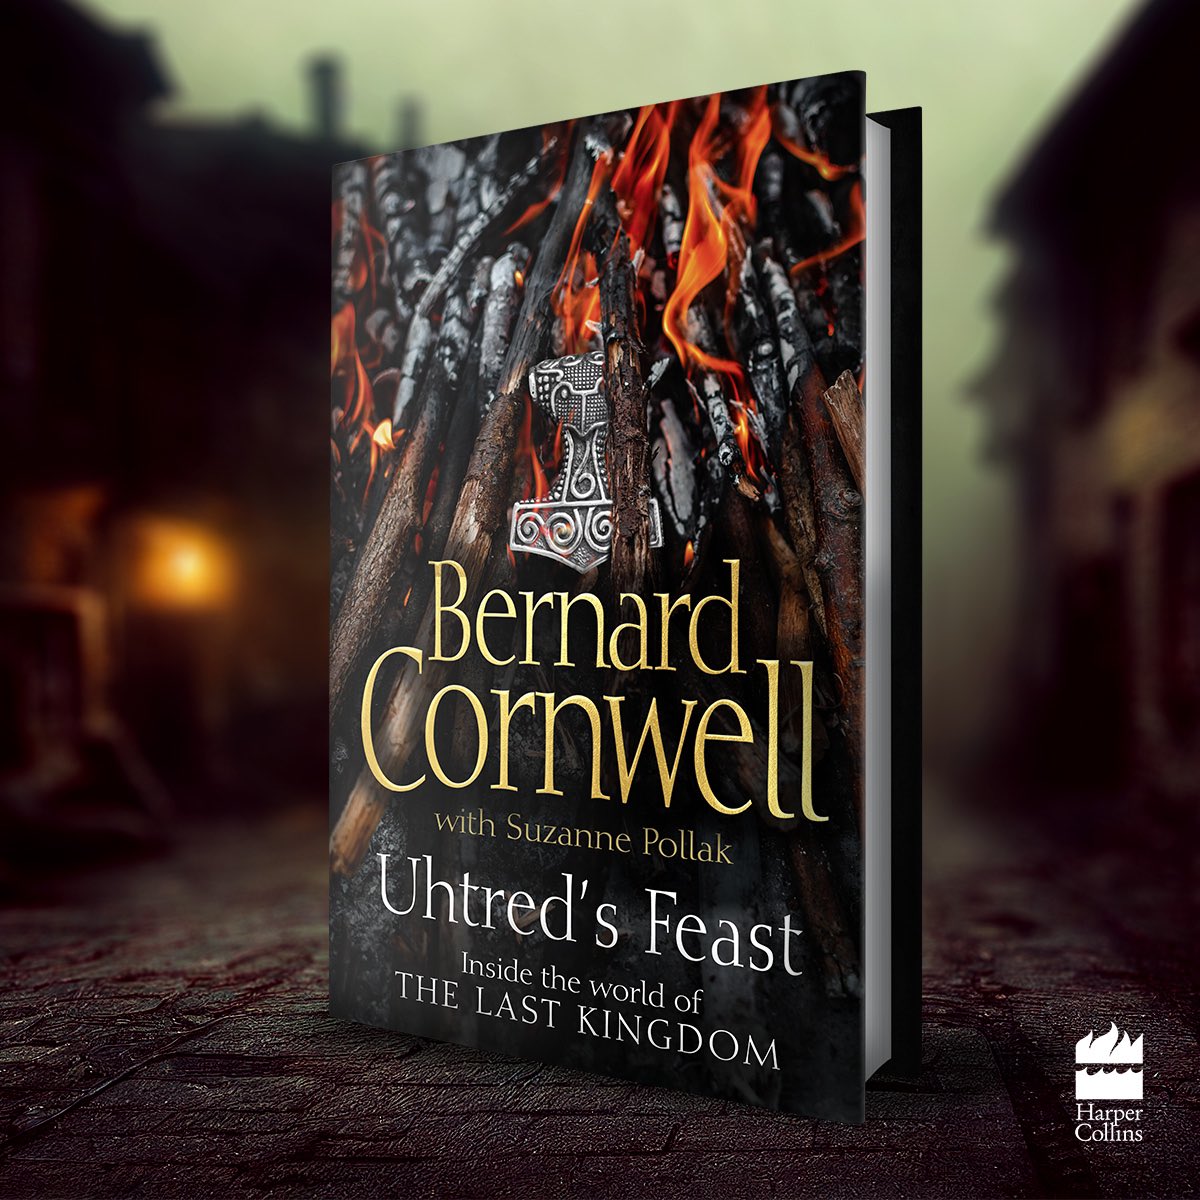 Have you watched The Last Kingdom: Seven Kings Must Die yet? Dive deeper into the world of Uhtred with UHTRED'S FEAST. Uhtred's Feast explores some of the Saxon world, along with further tales of Uhtred that Bernard Cornwell was eager to tell. Pre-order smarturl.it/uhtredsfeast